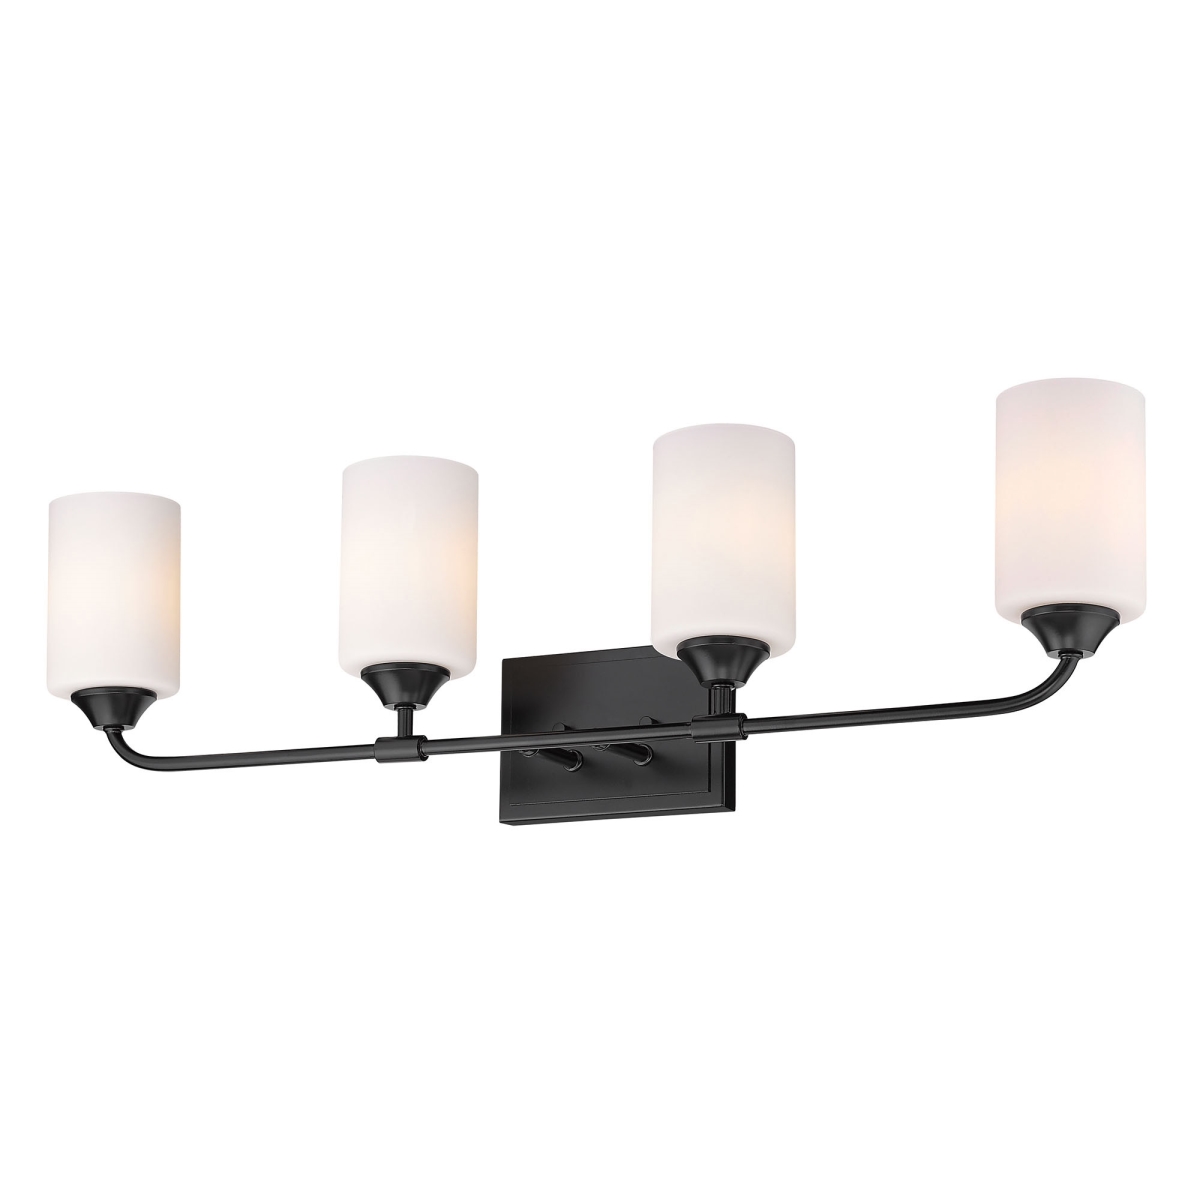 2120-ba4 Blk-cyl-op Ormond 4 Light Bath Vanity In Black With Cylindrical Opal Glass Shade